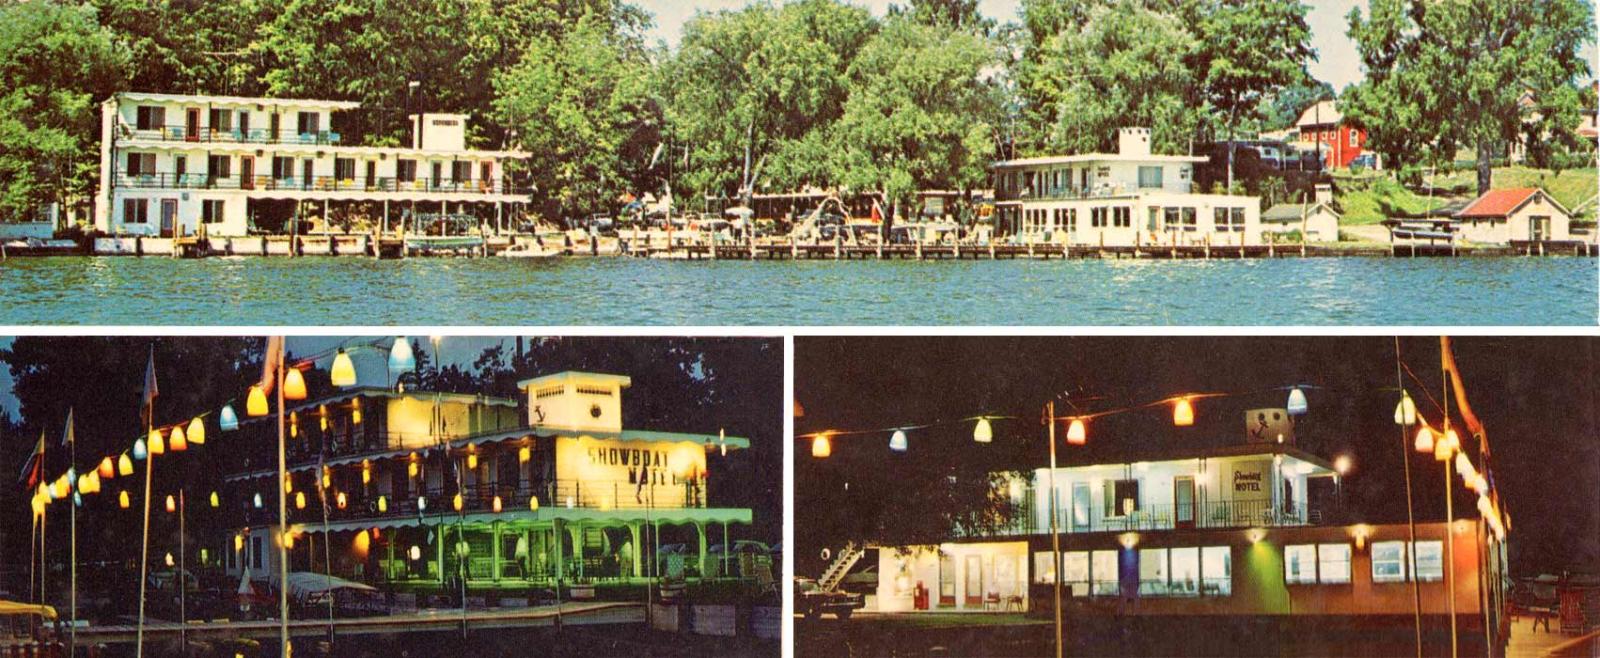 water view of showboat motel